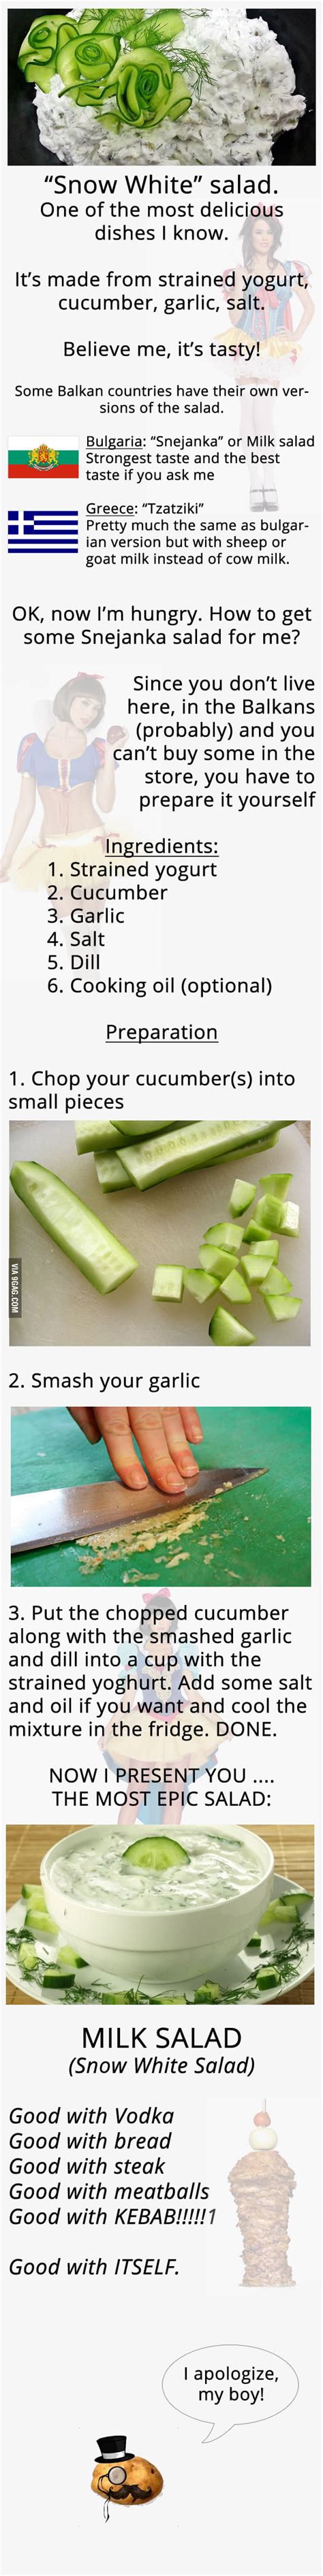 everyone should try it at least once in a lifetime 9gag